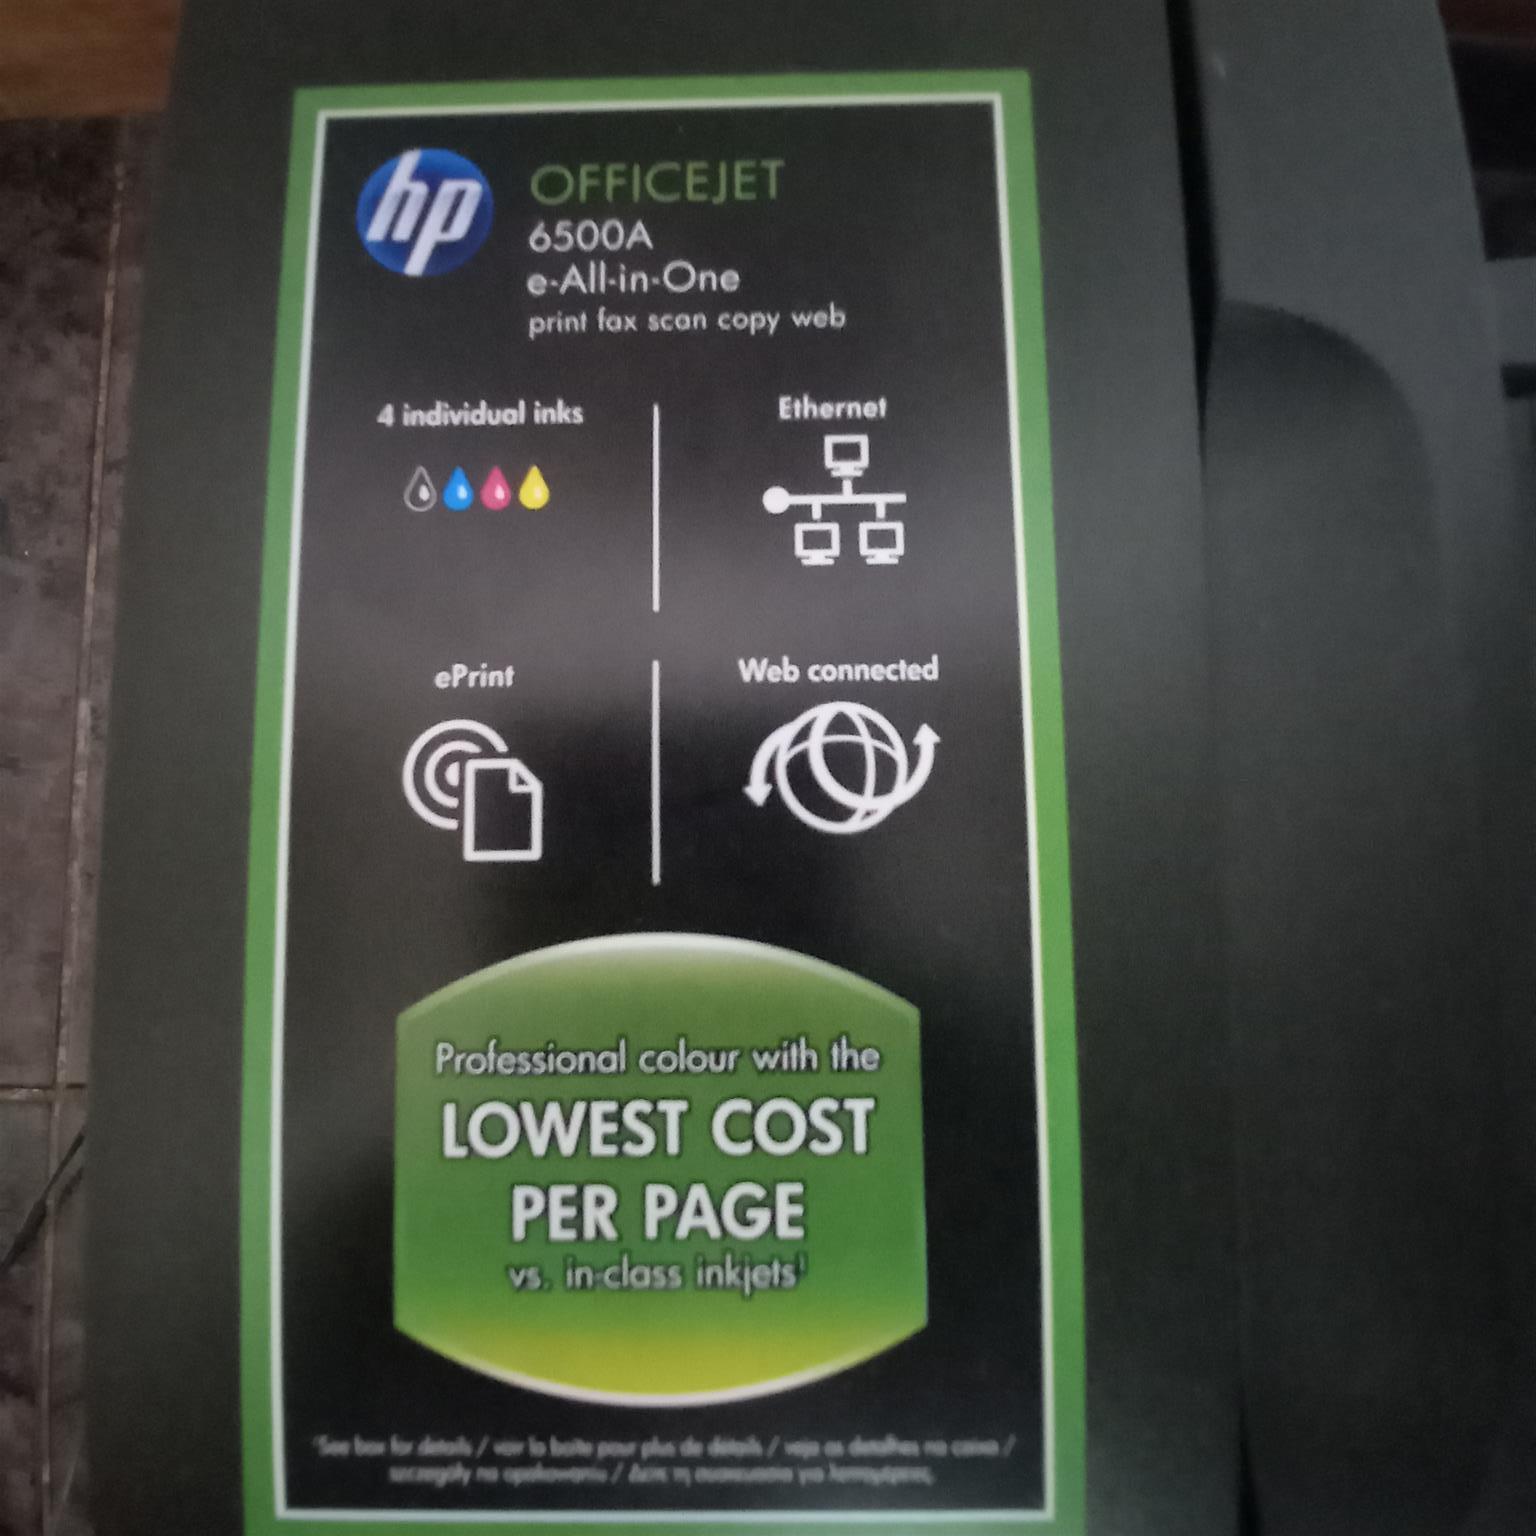 HP Officejet 6500A All in One Printer